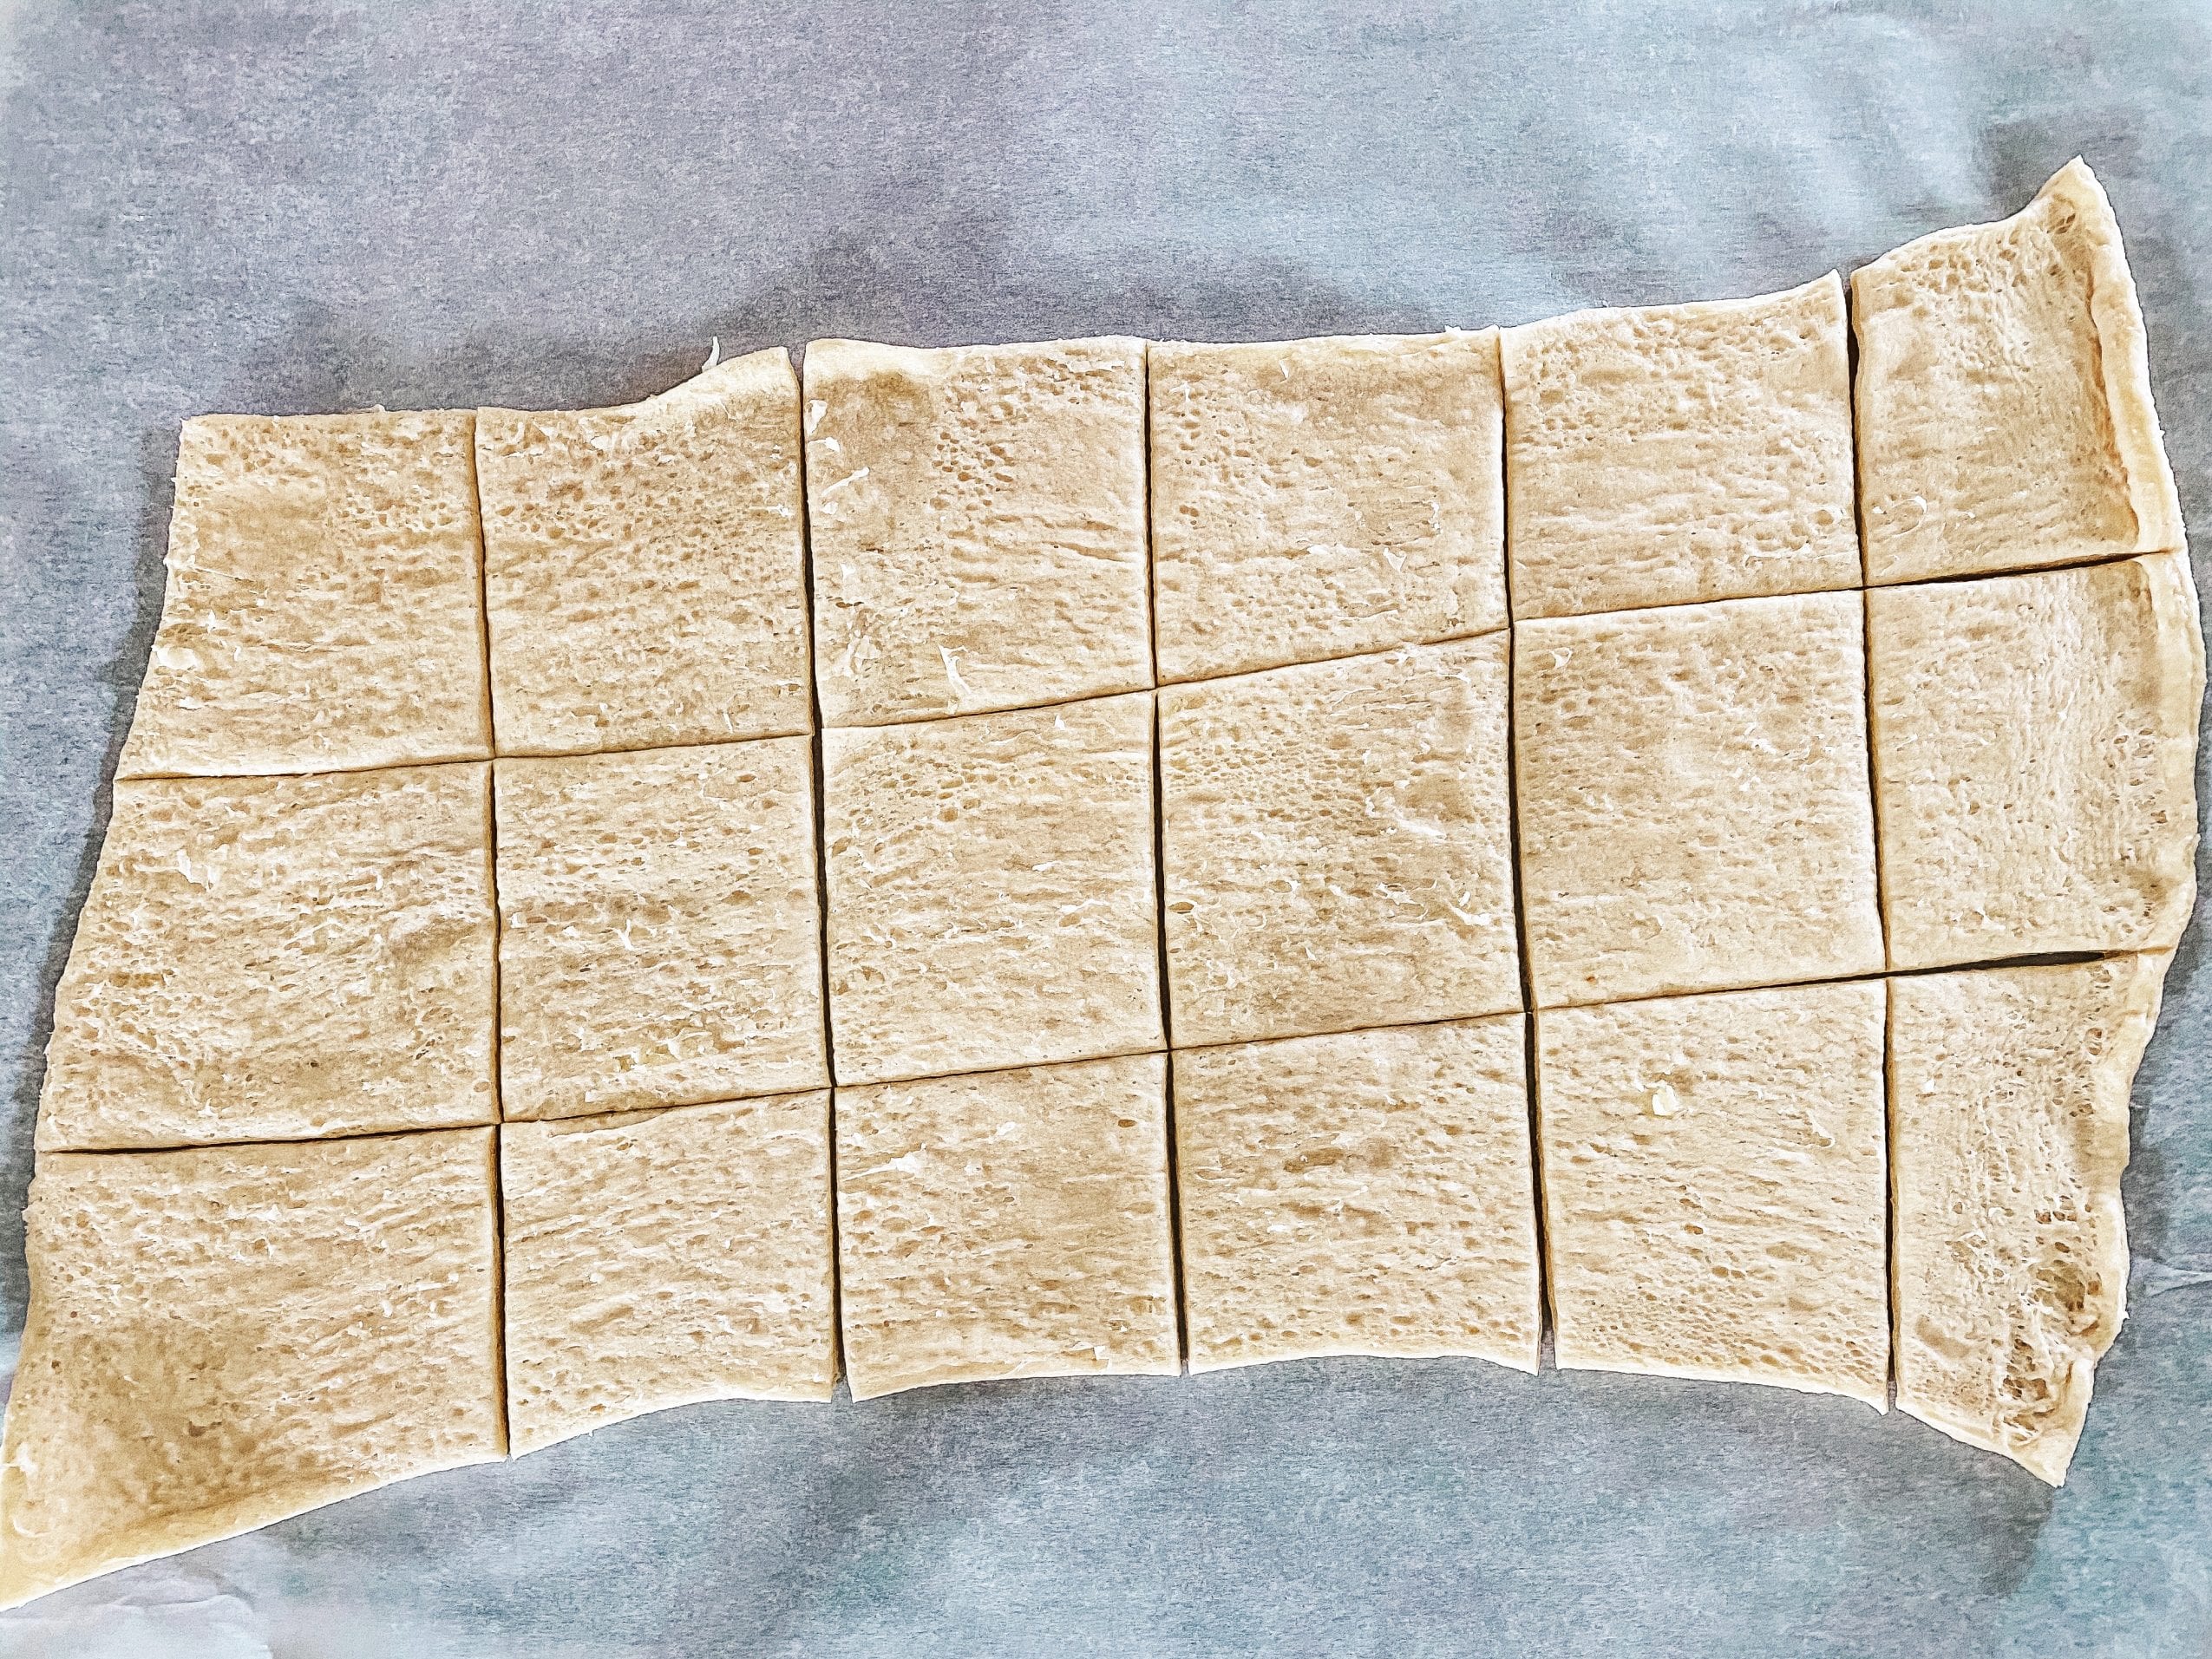 Cutting the Pillsbury Crescent Dough Sheet for Cream Cheese and Sausage Pastries